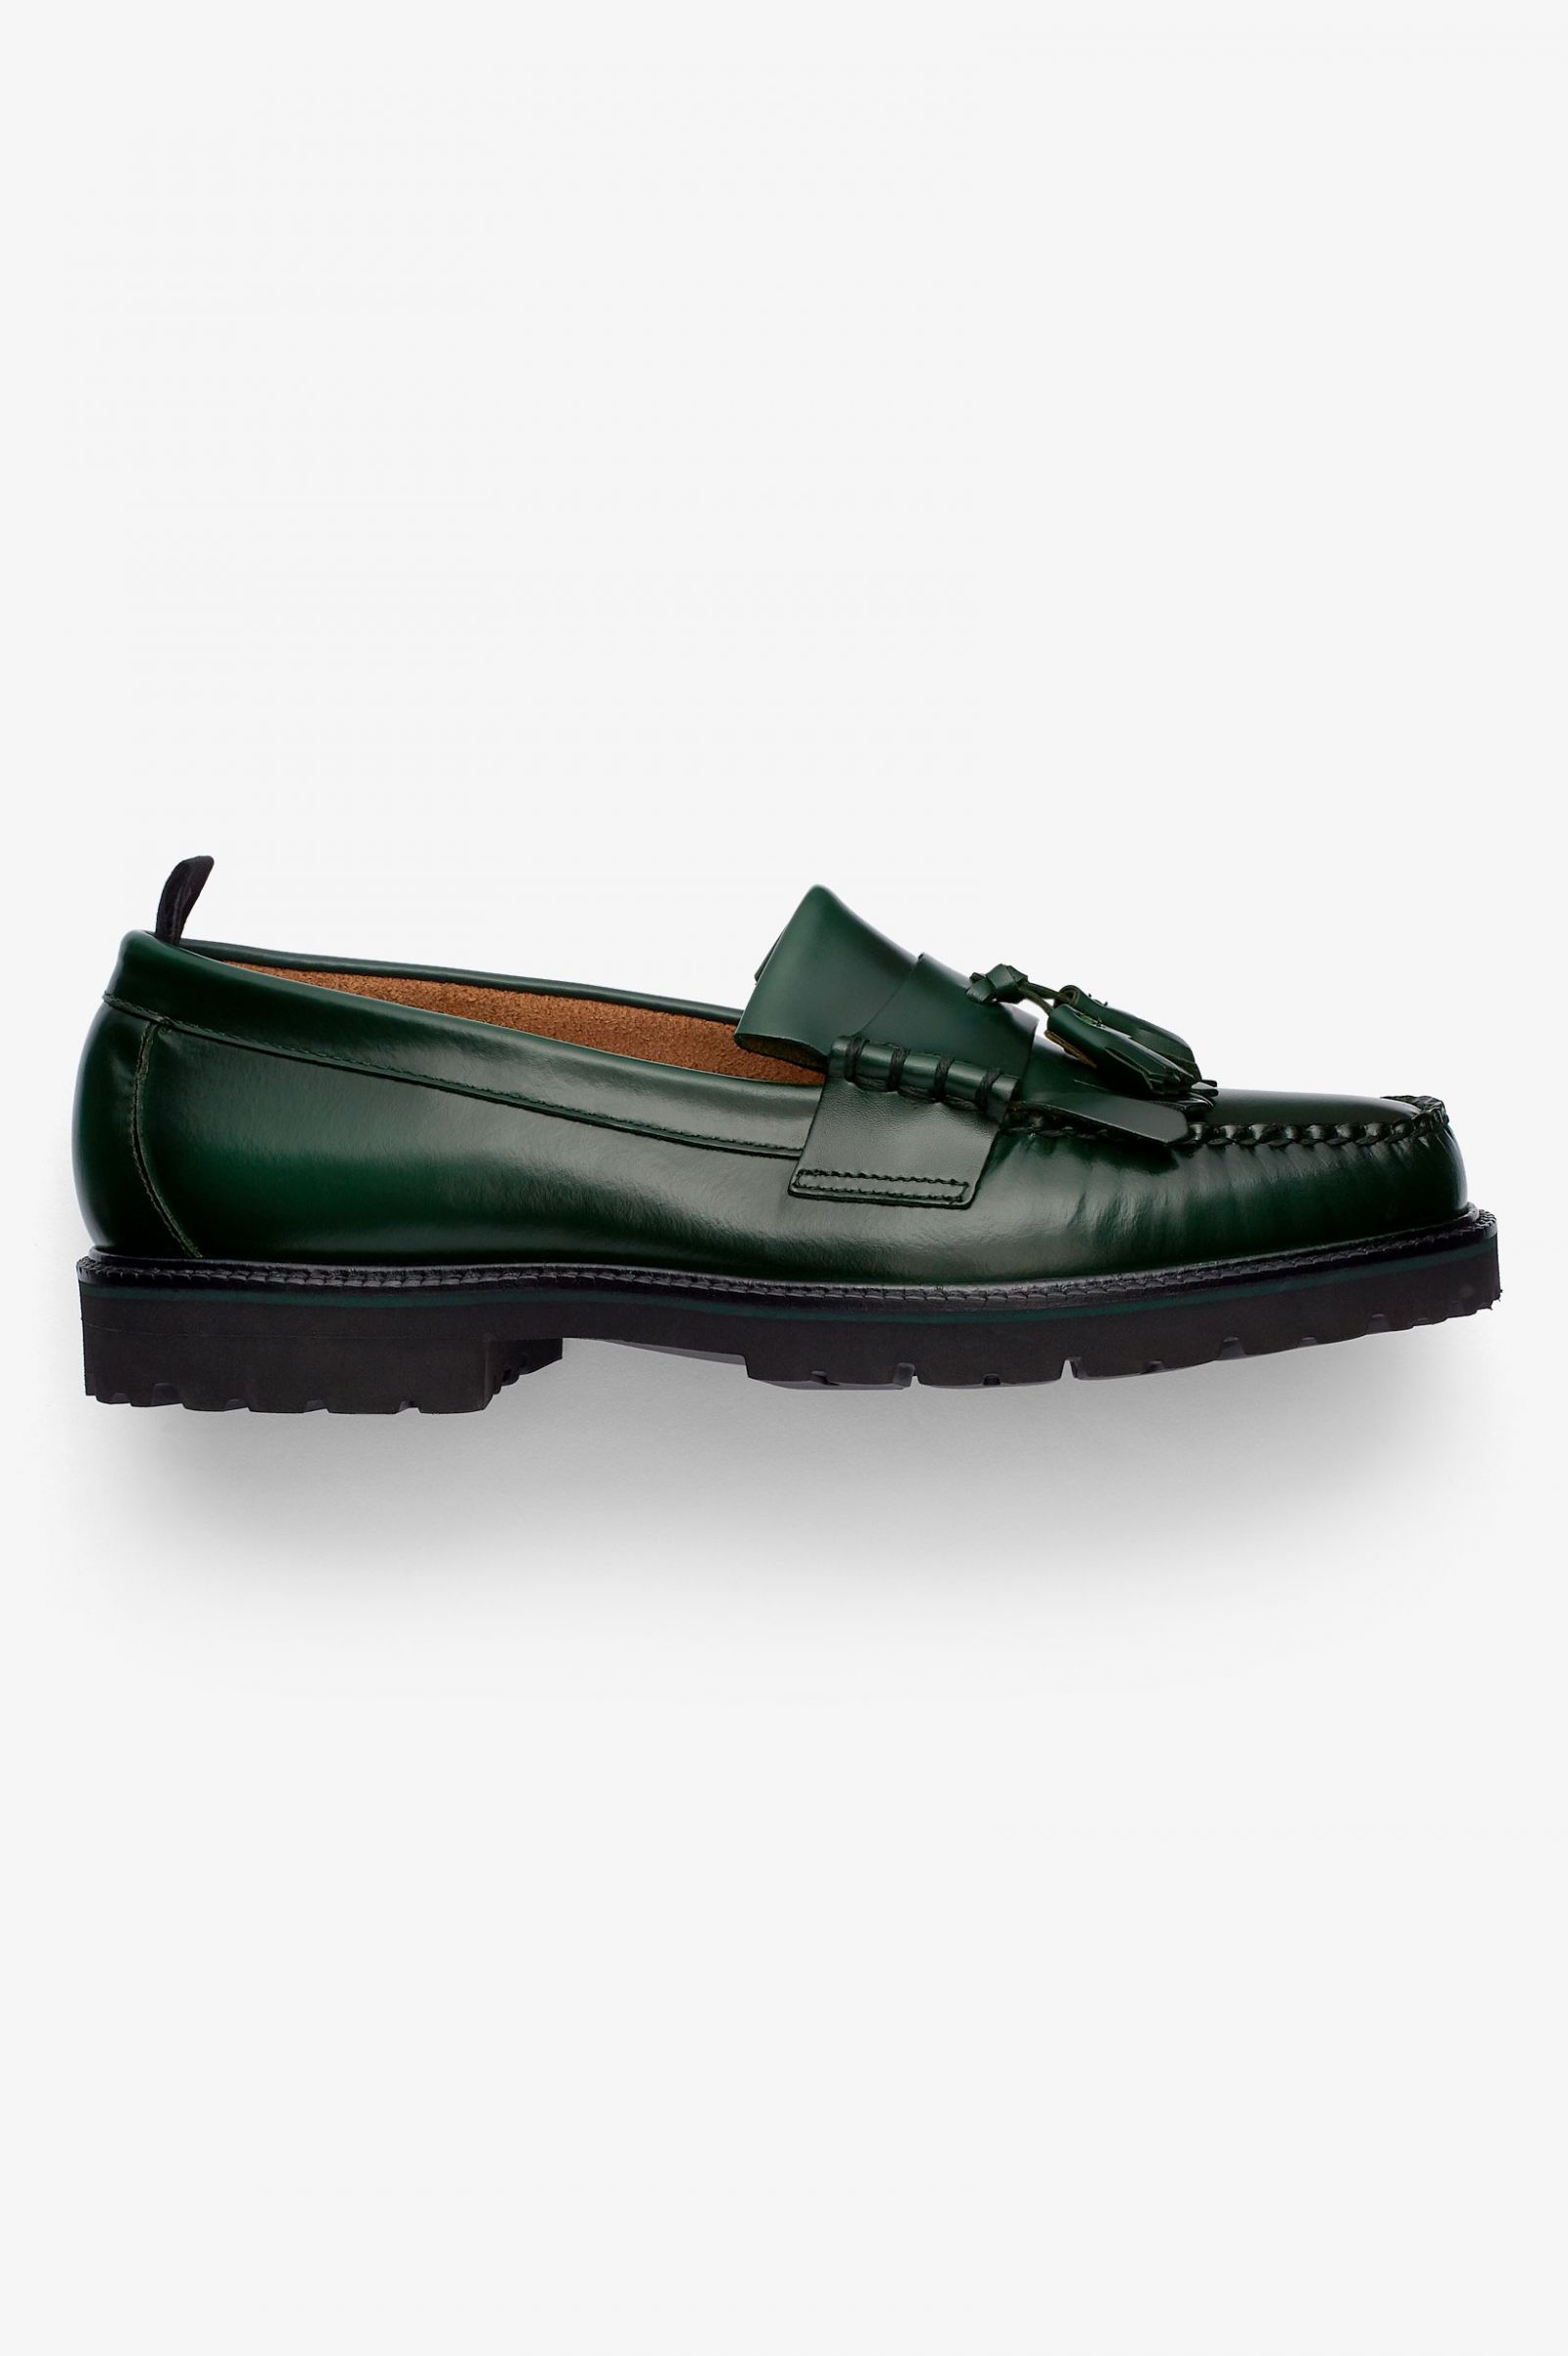 fred perry x george cox leather tassel loafer